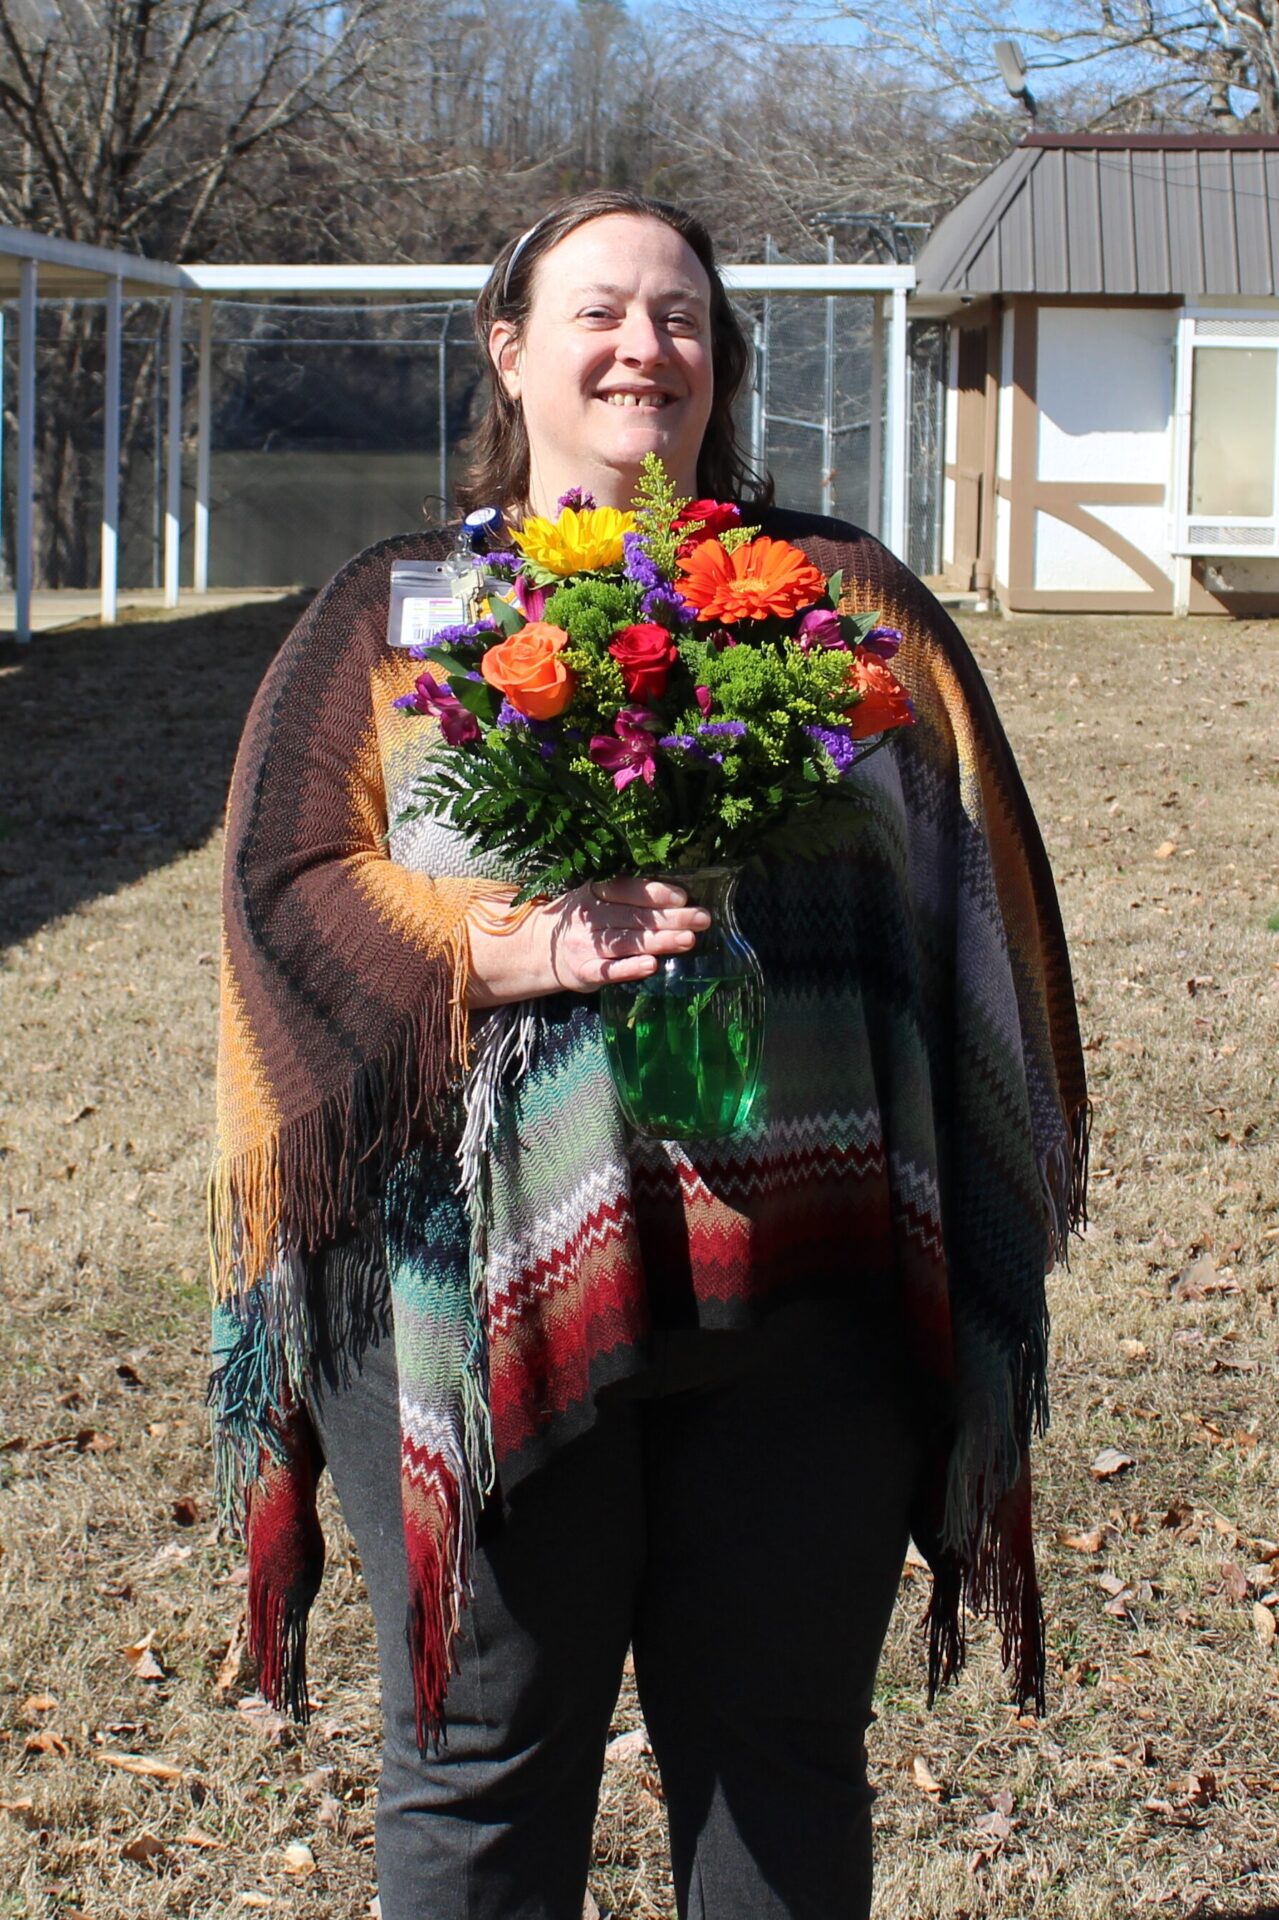 Robin is pictured here outside holding her BEE flower arrangement.